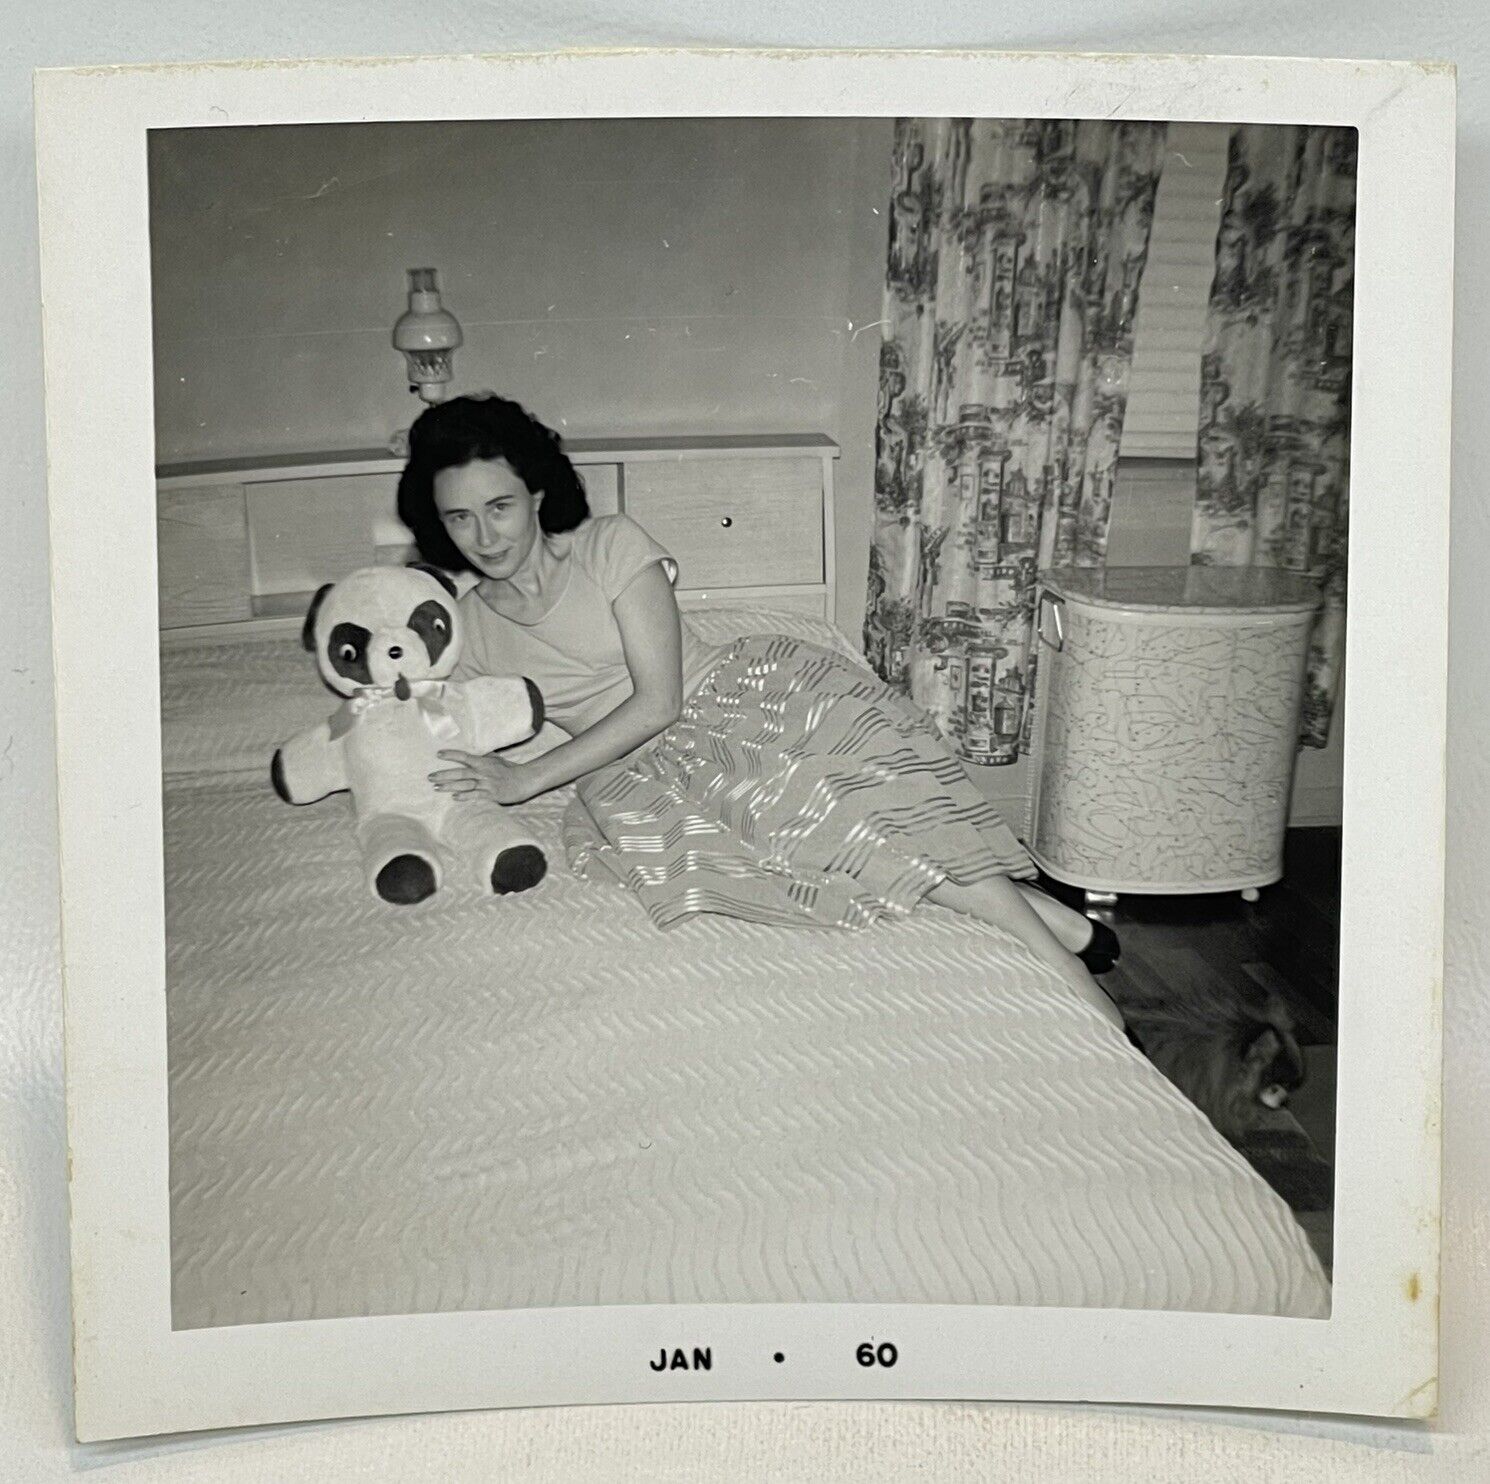 Vtg 1960s Snapshot Photo Fashionable Woman Posing on Bed With Teddy Bear MCM